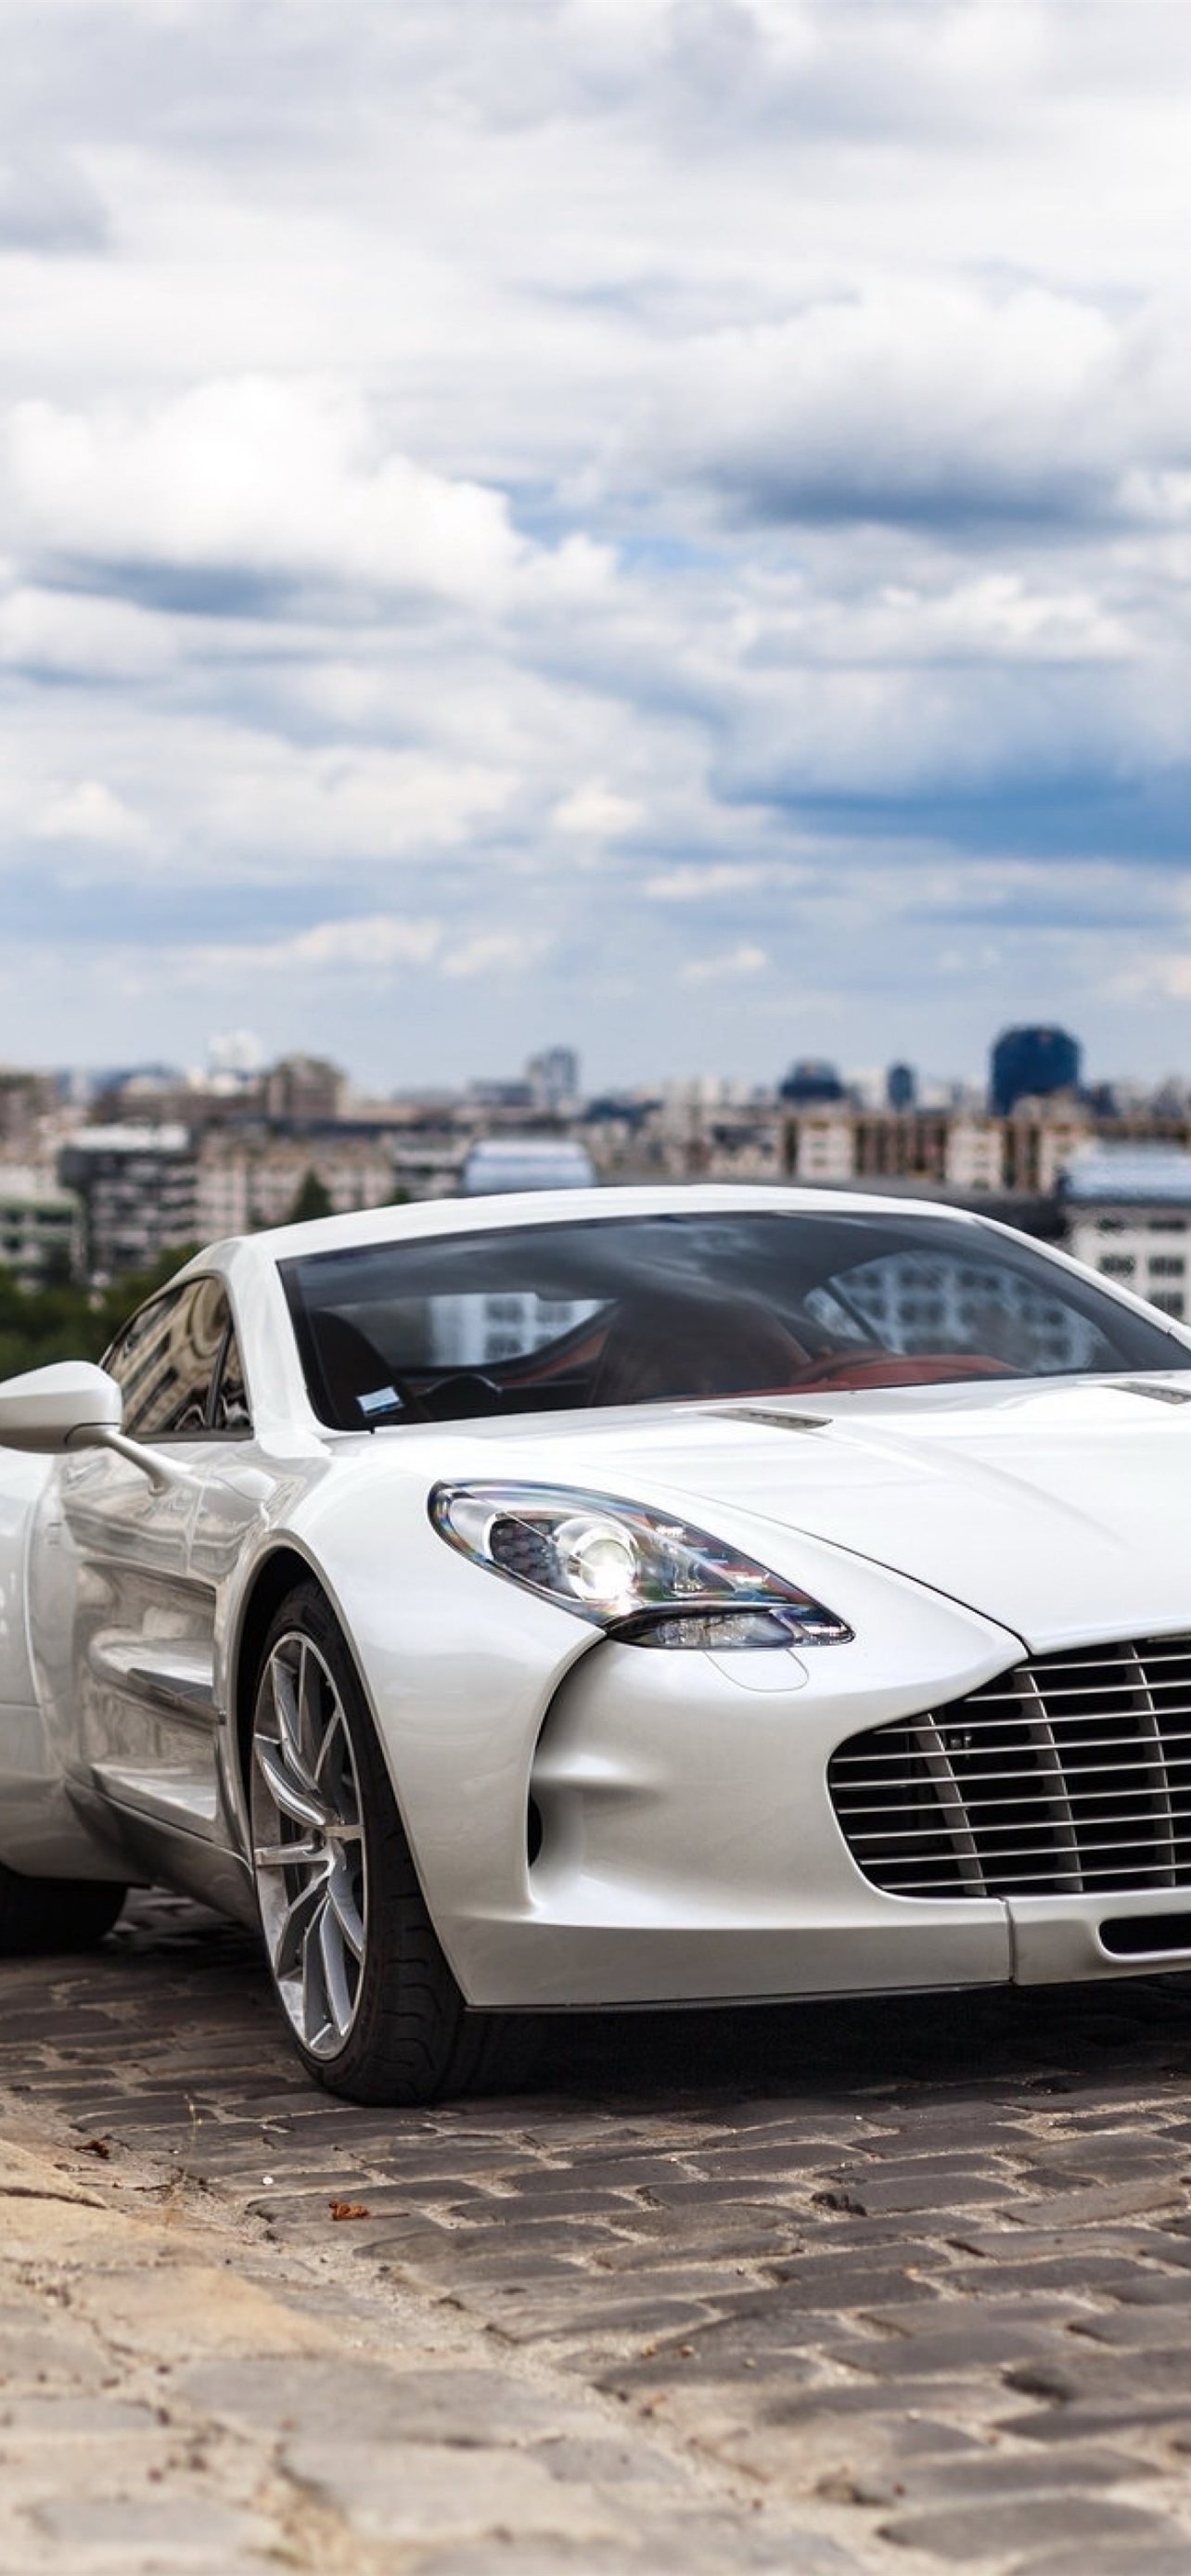 Aston Martin One-77, iPhone wallpapers, High definition, Luxury sports car, 1290x2780 HD Phone